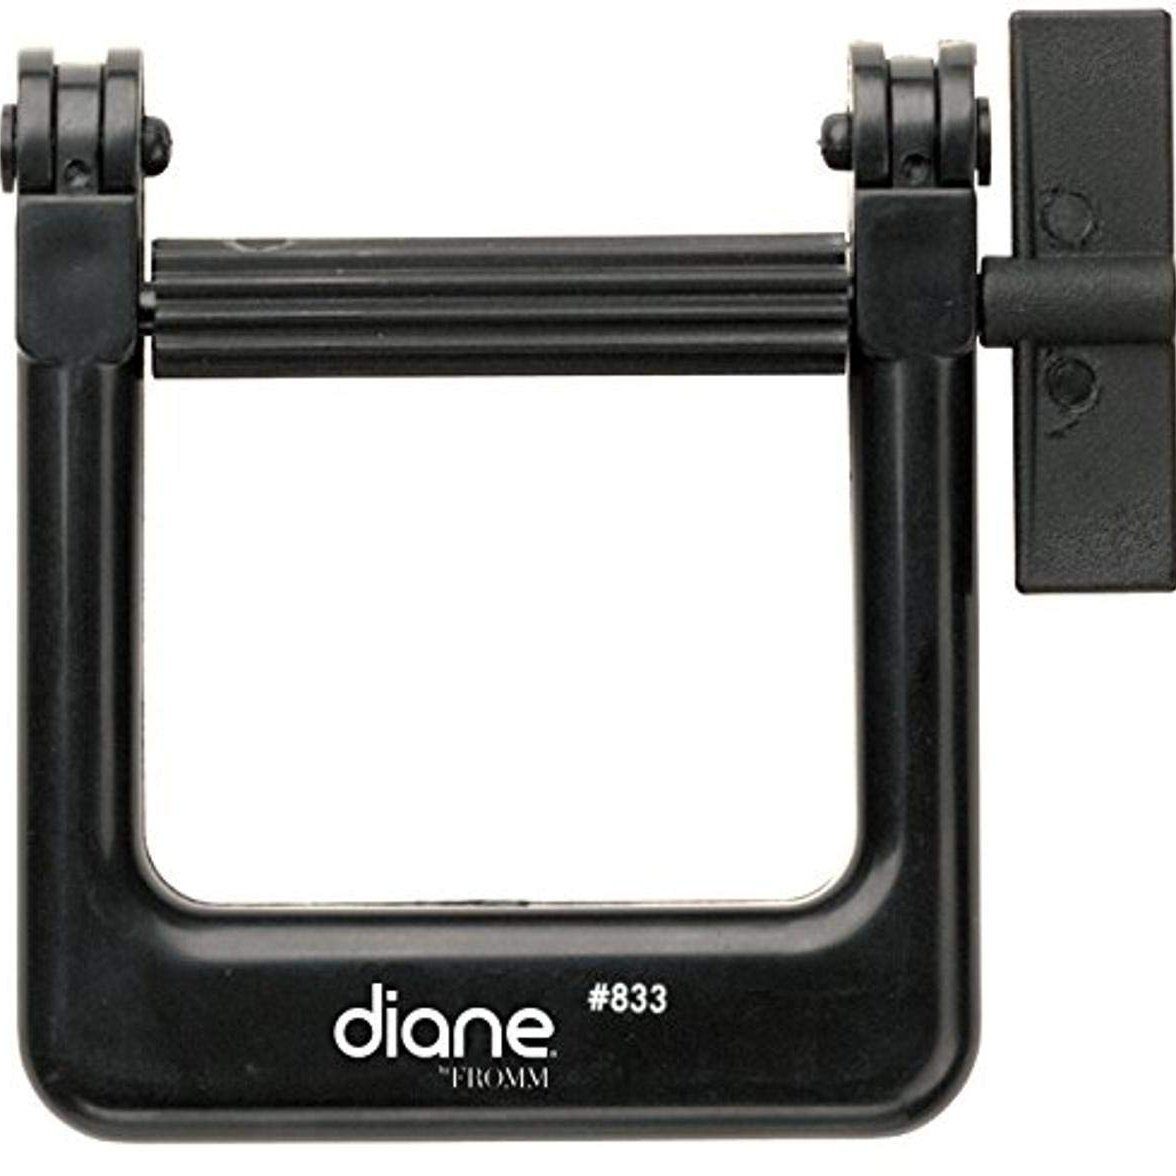 Color Tube Squeezer | D833 HAIR COLORING ACCESSORIES DIANE 